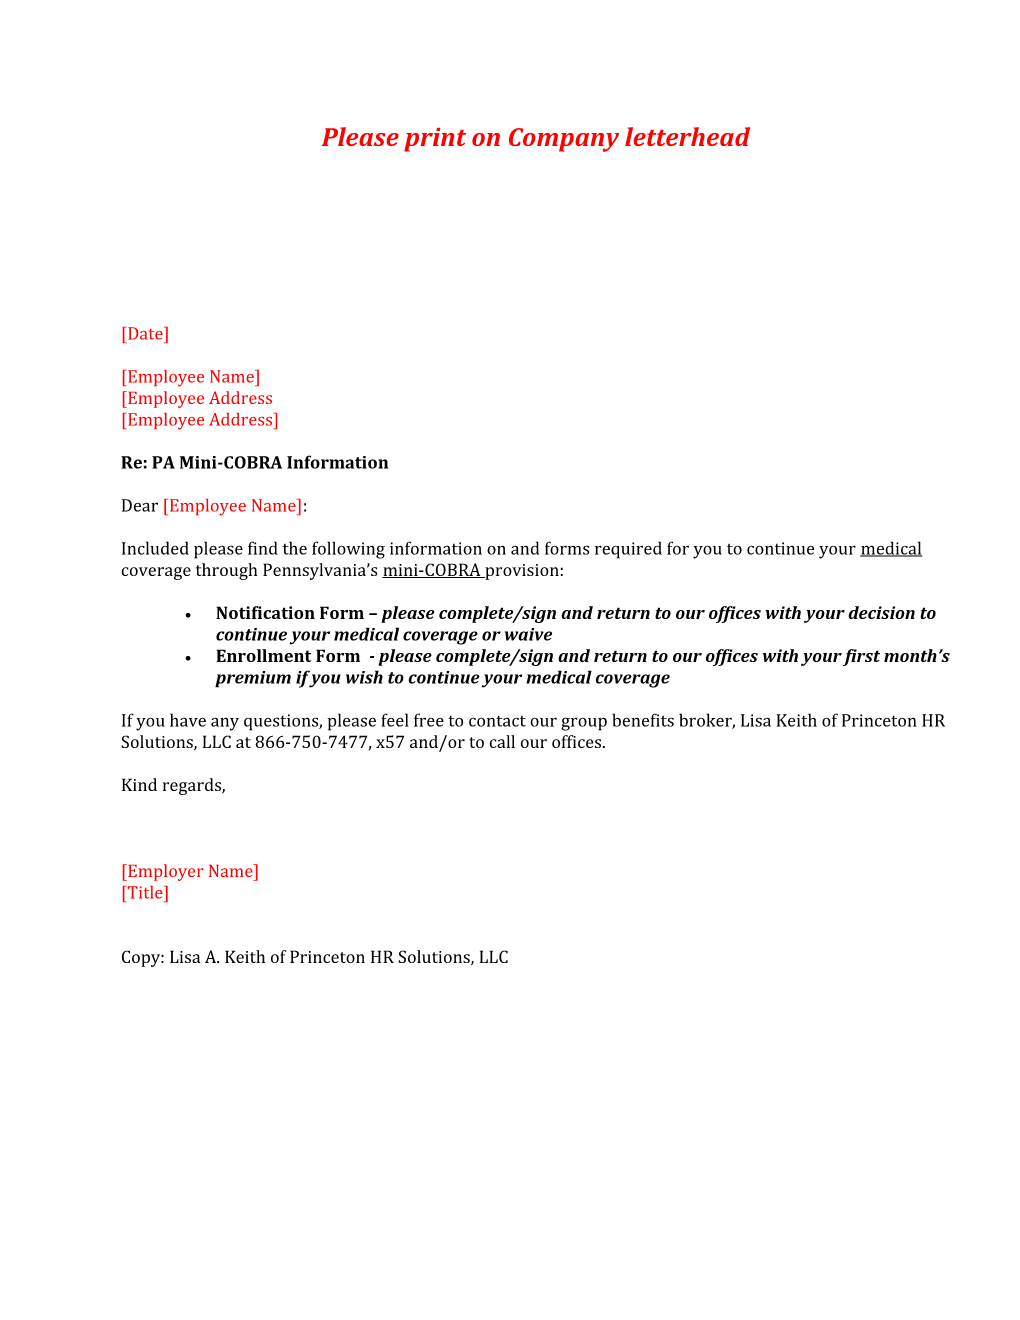 Ÿ Sample PA Continuation Letter (Pg 2) : Complete/Edit As Necessary, Print on Company Letterhead